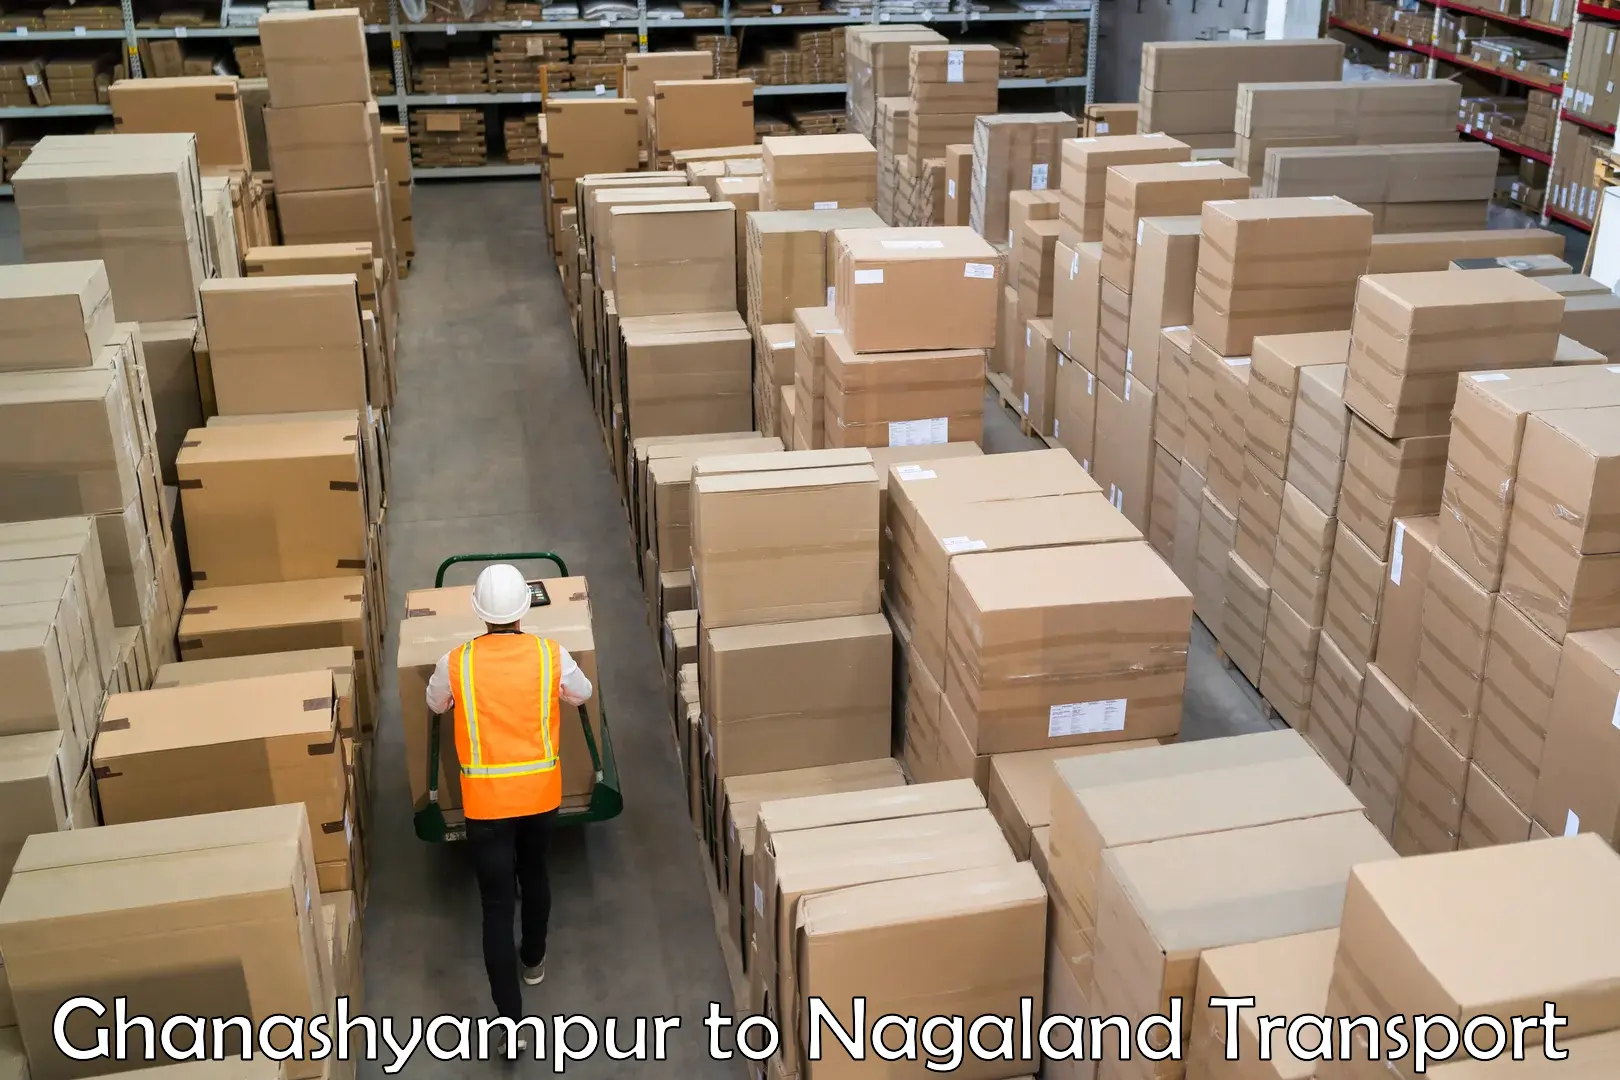 Truck transport companies in India Ghanashyampur to Nagaland